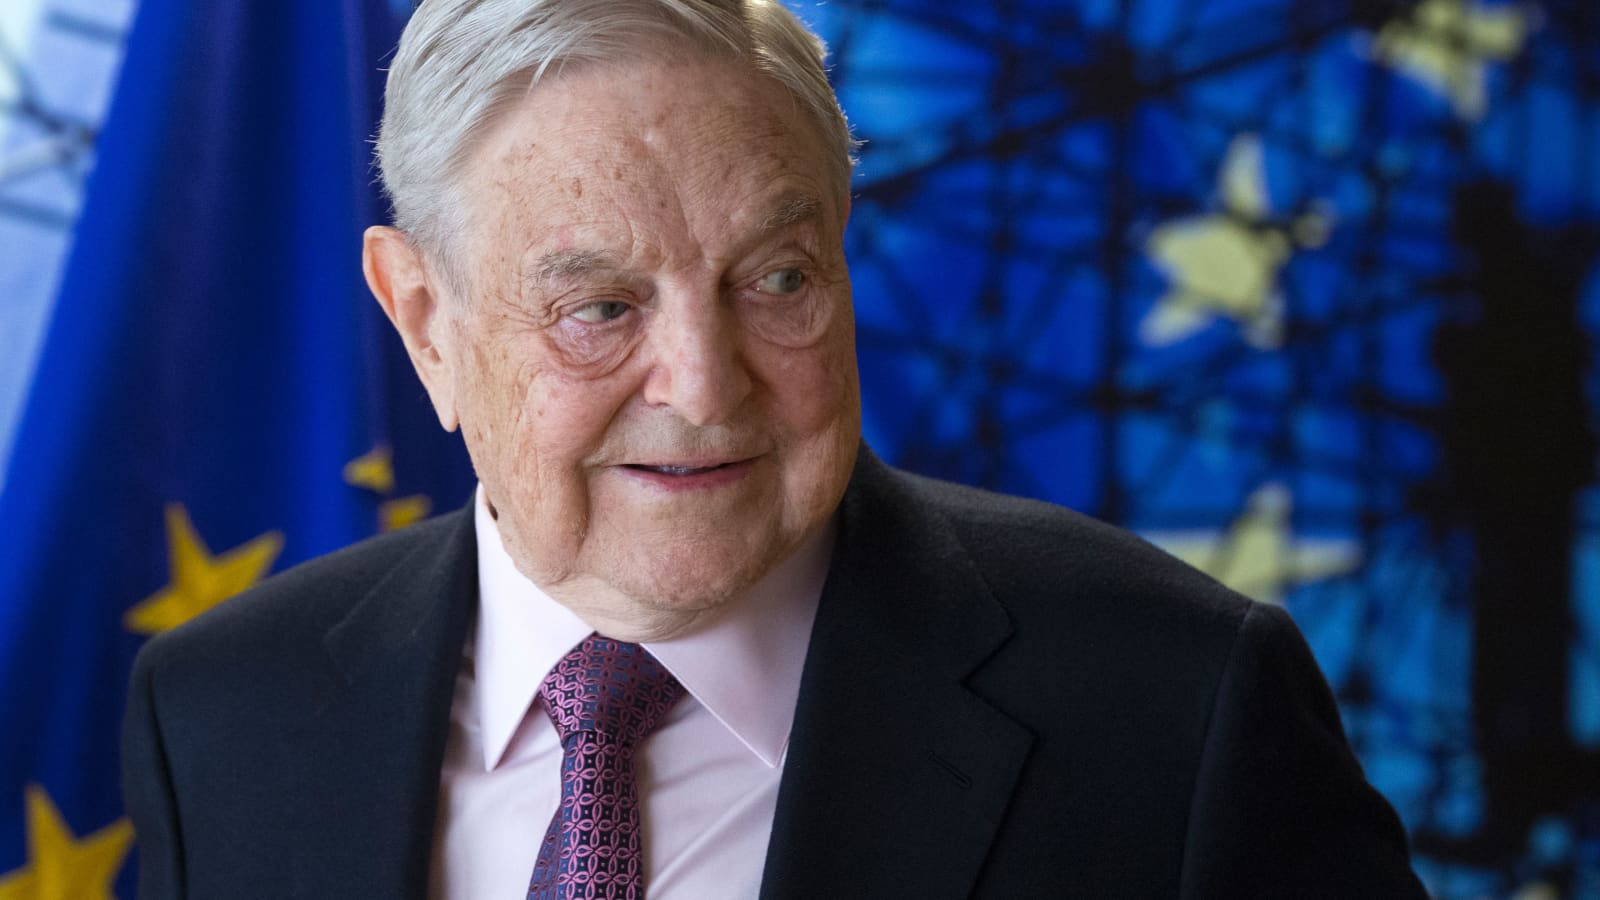 George Soros The EU could collapse in the same way the Soviet